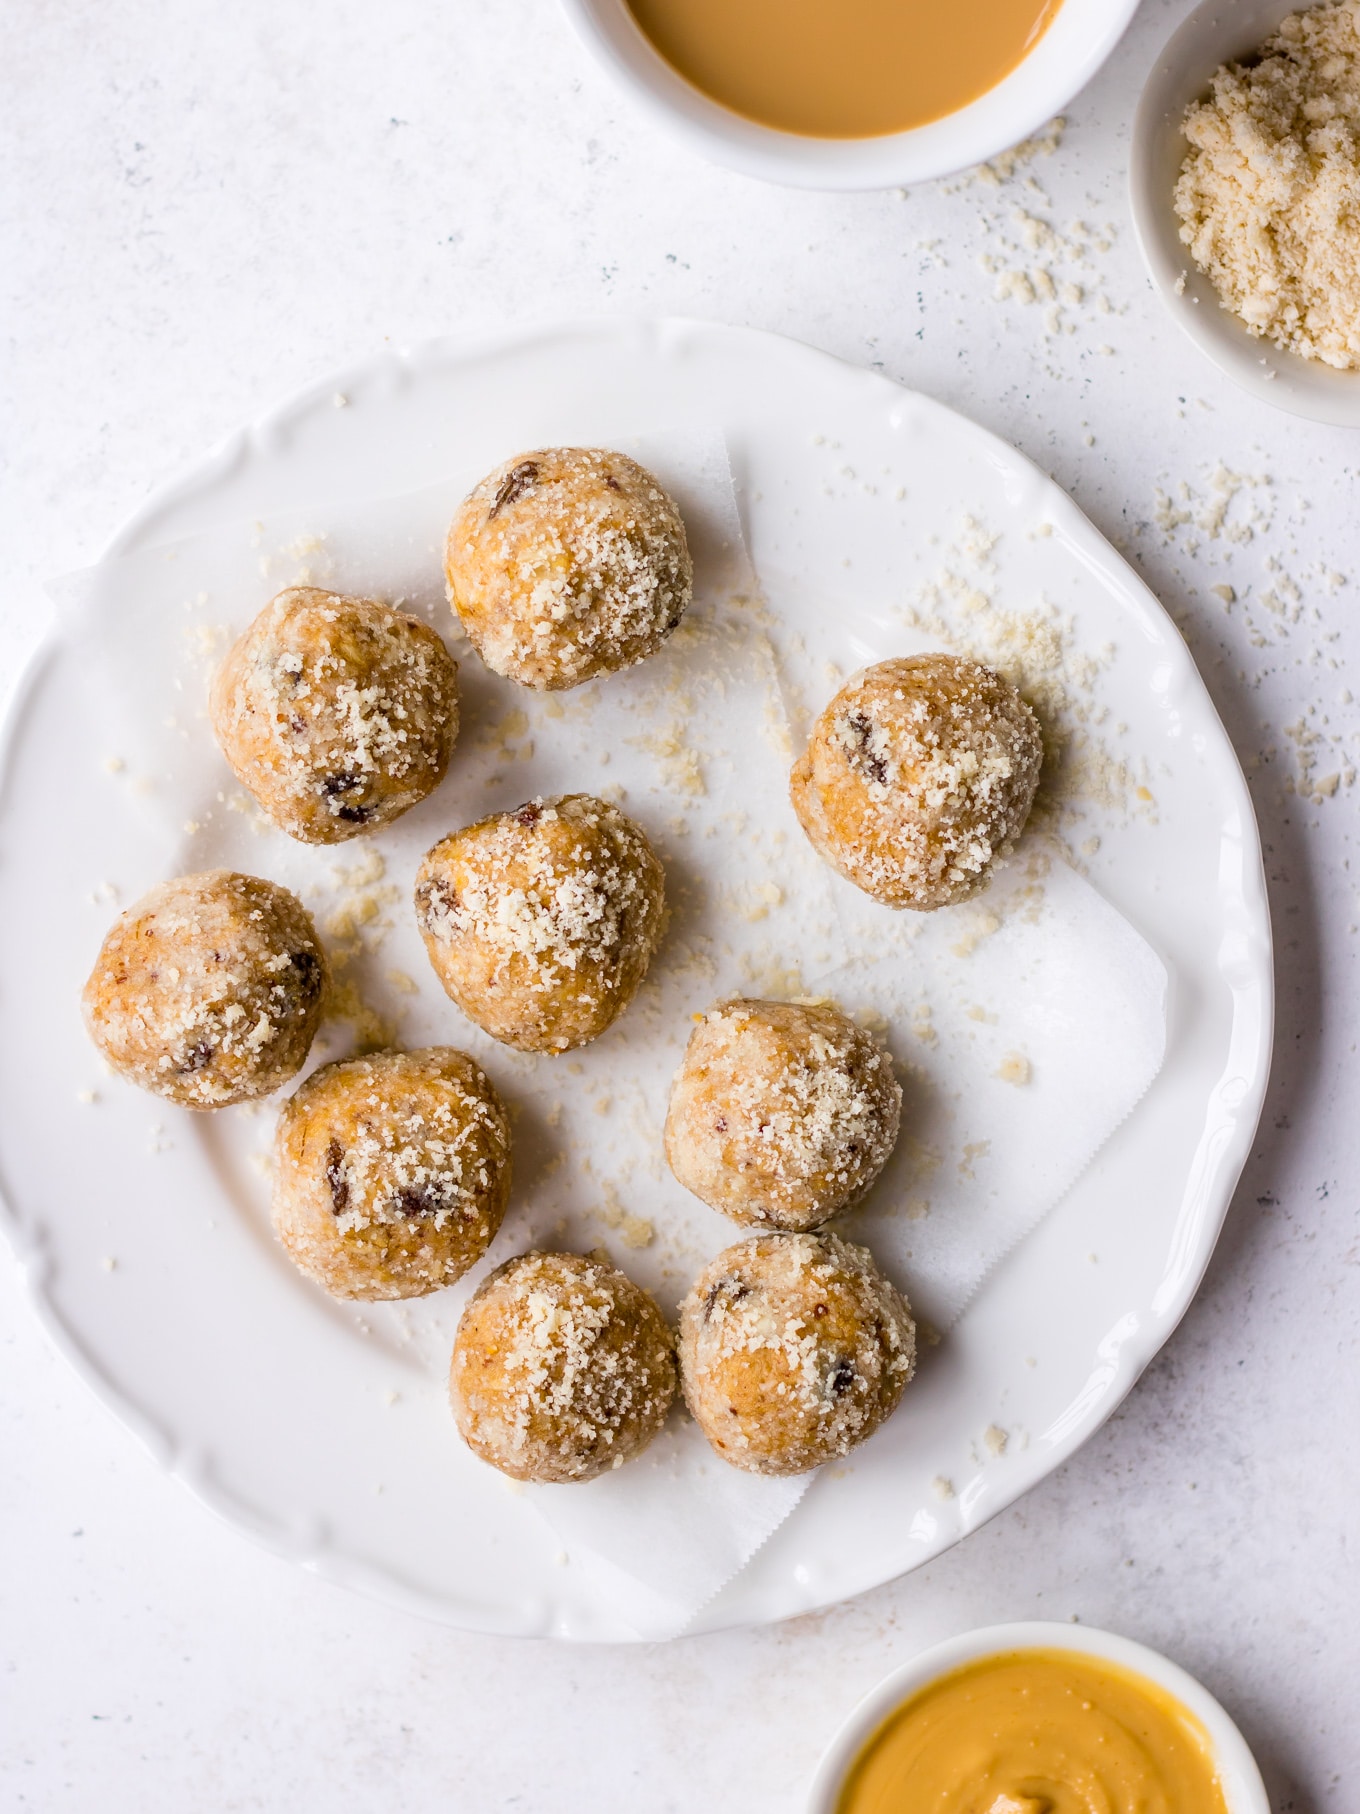 Lactation Bites bliss balls arranged on a white irregular plate, scattered with almond meal